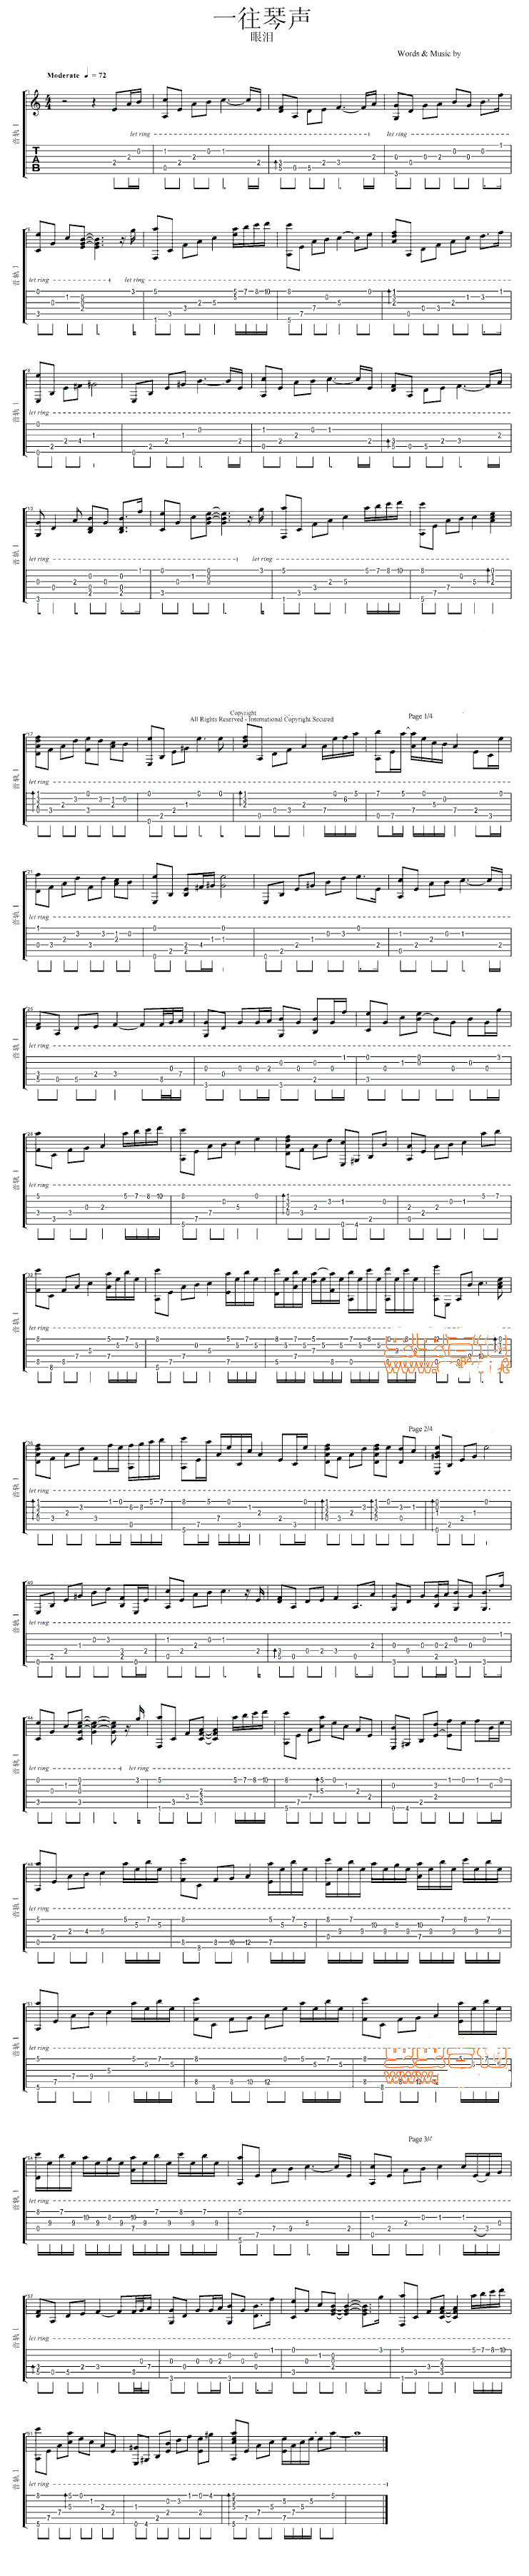 Tears by The daydream Guitar Sheet Music Free